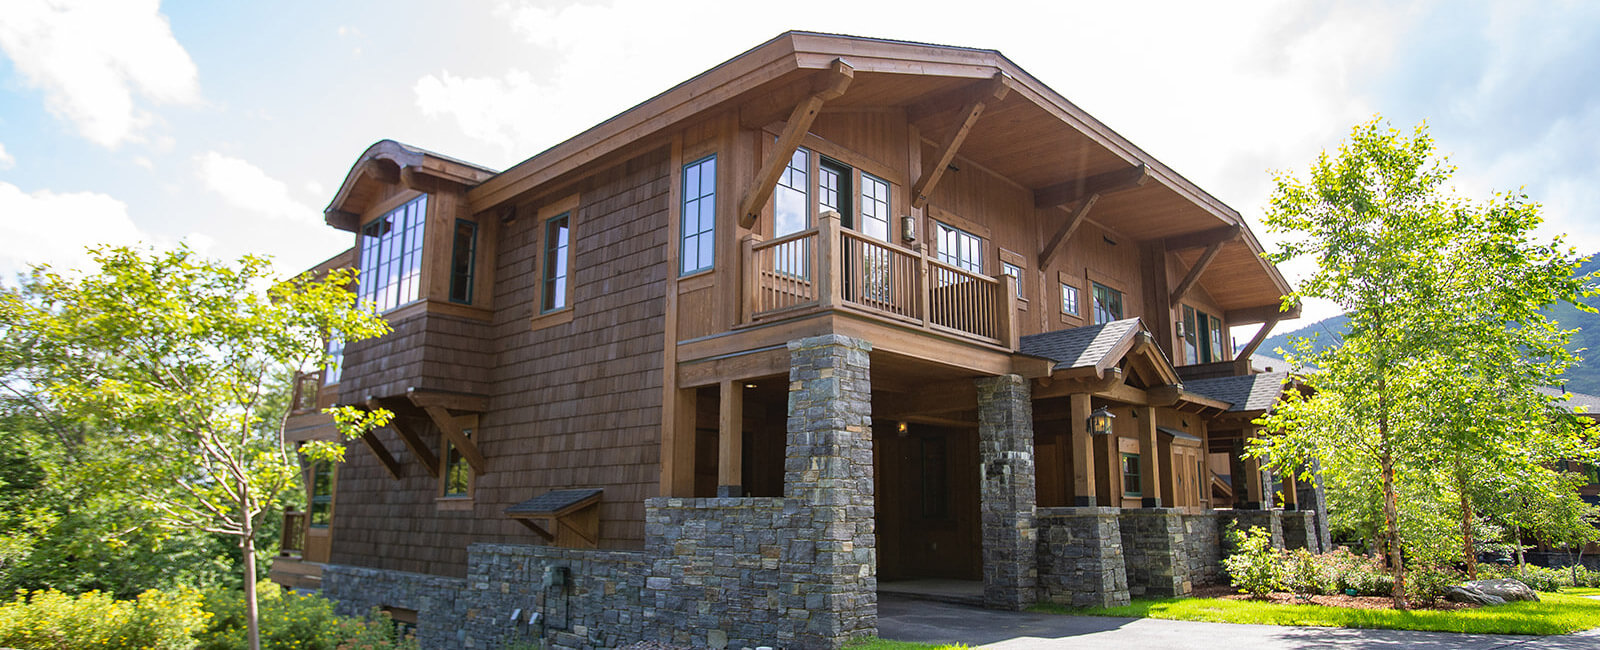 Large Luxurious four bedroom slopeside homes with approximately 3,000 sf of living space, designed in a “Vermont Alpine” style.